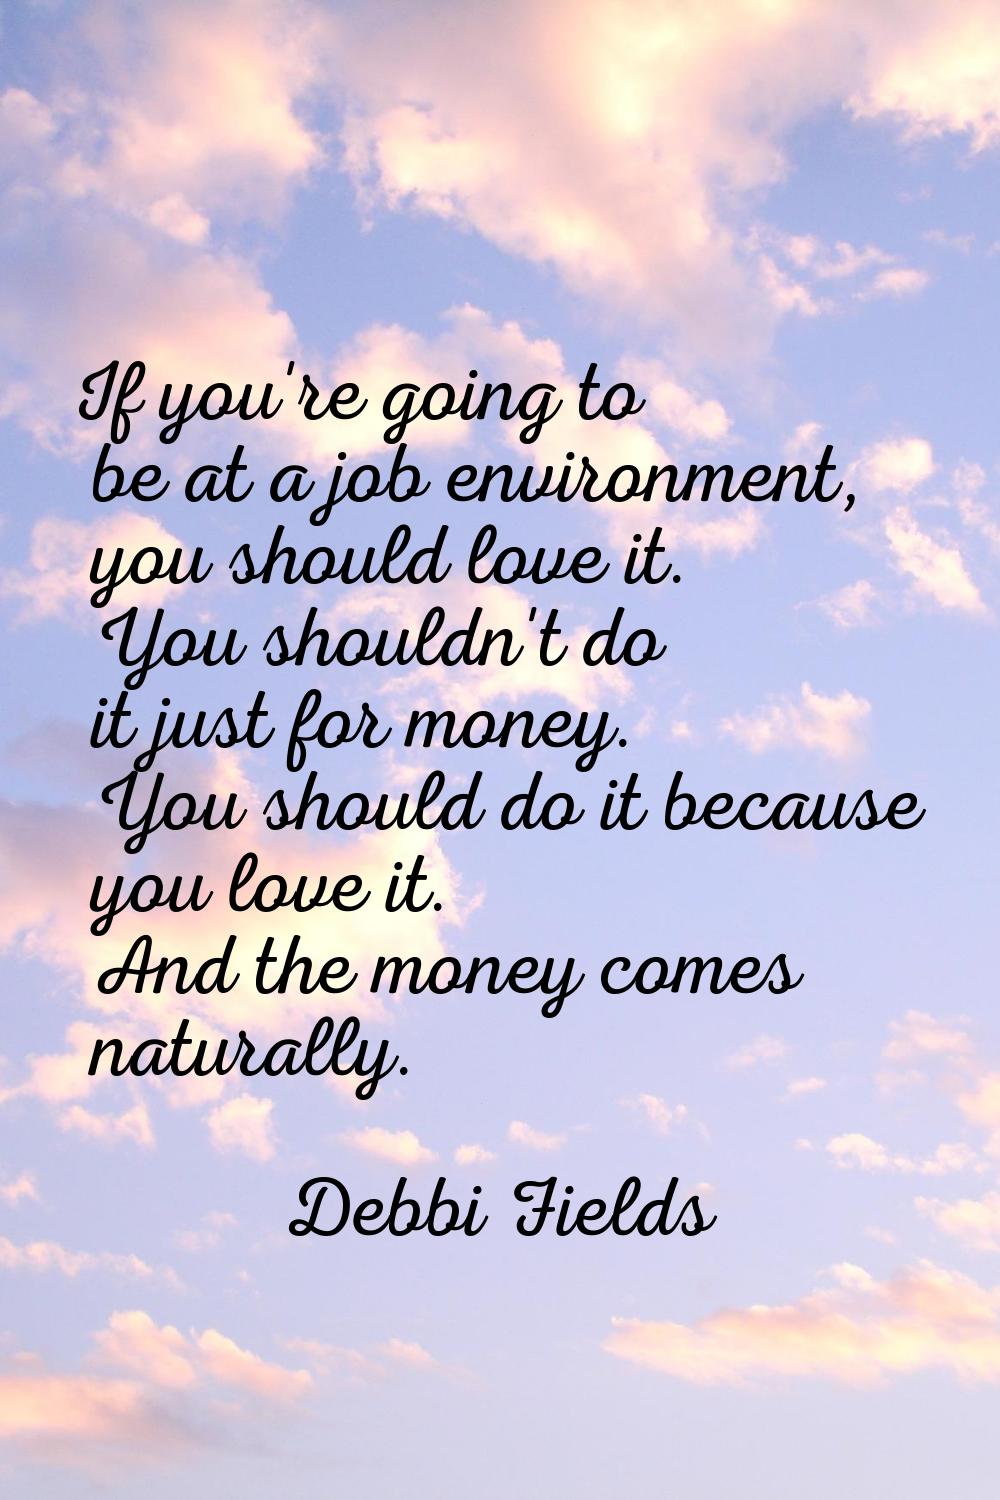 If you're going to be at a job environment, you should love it. You shouldn't do it just for money.